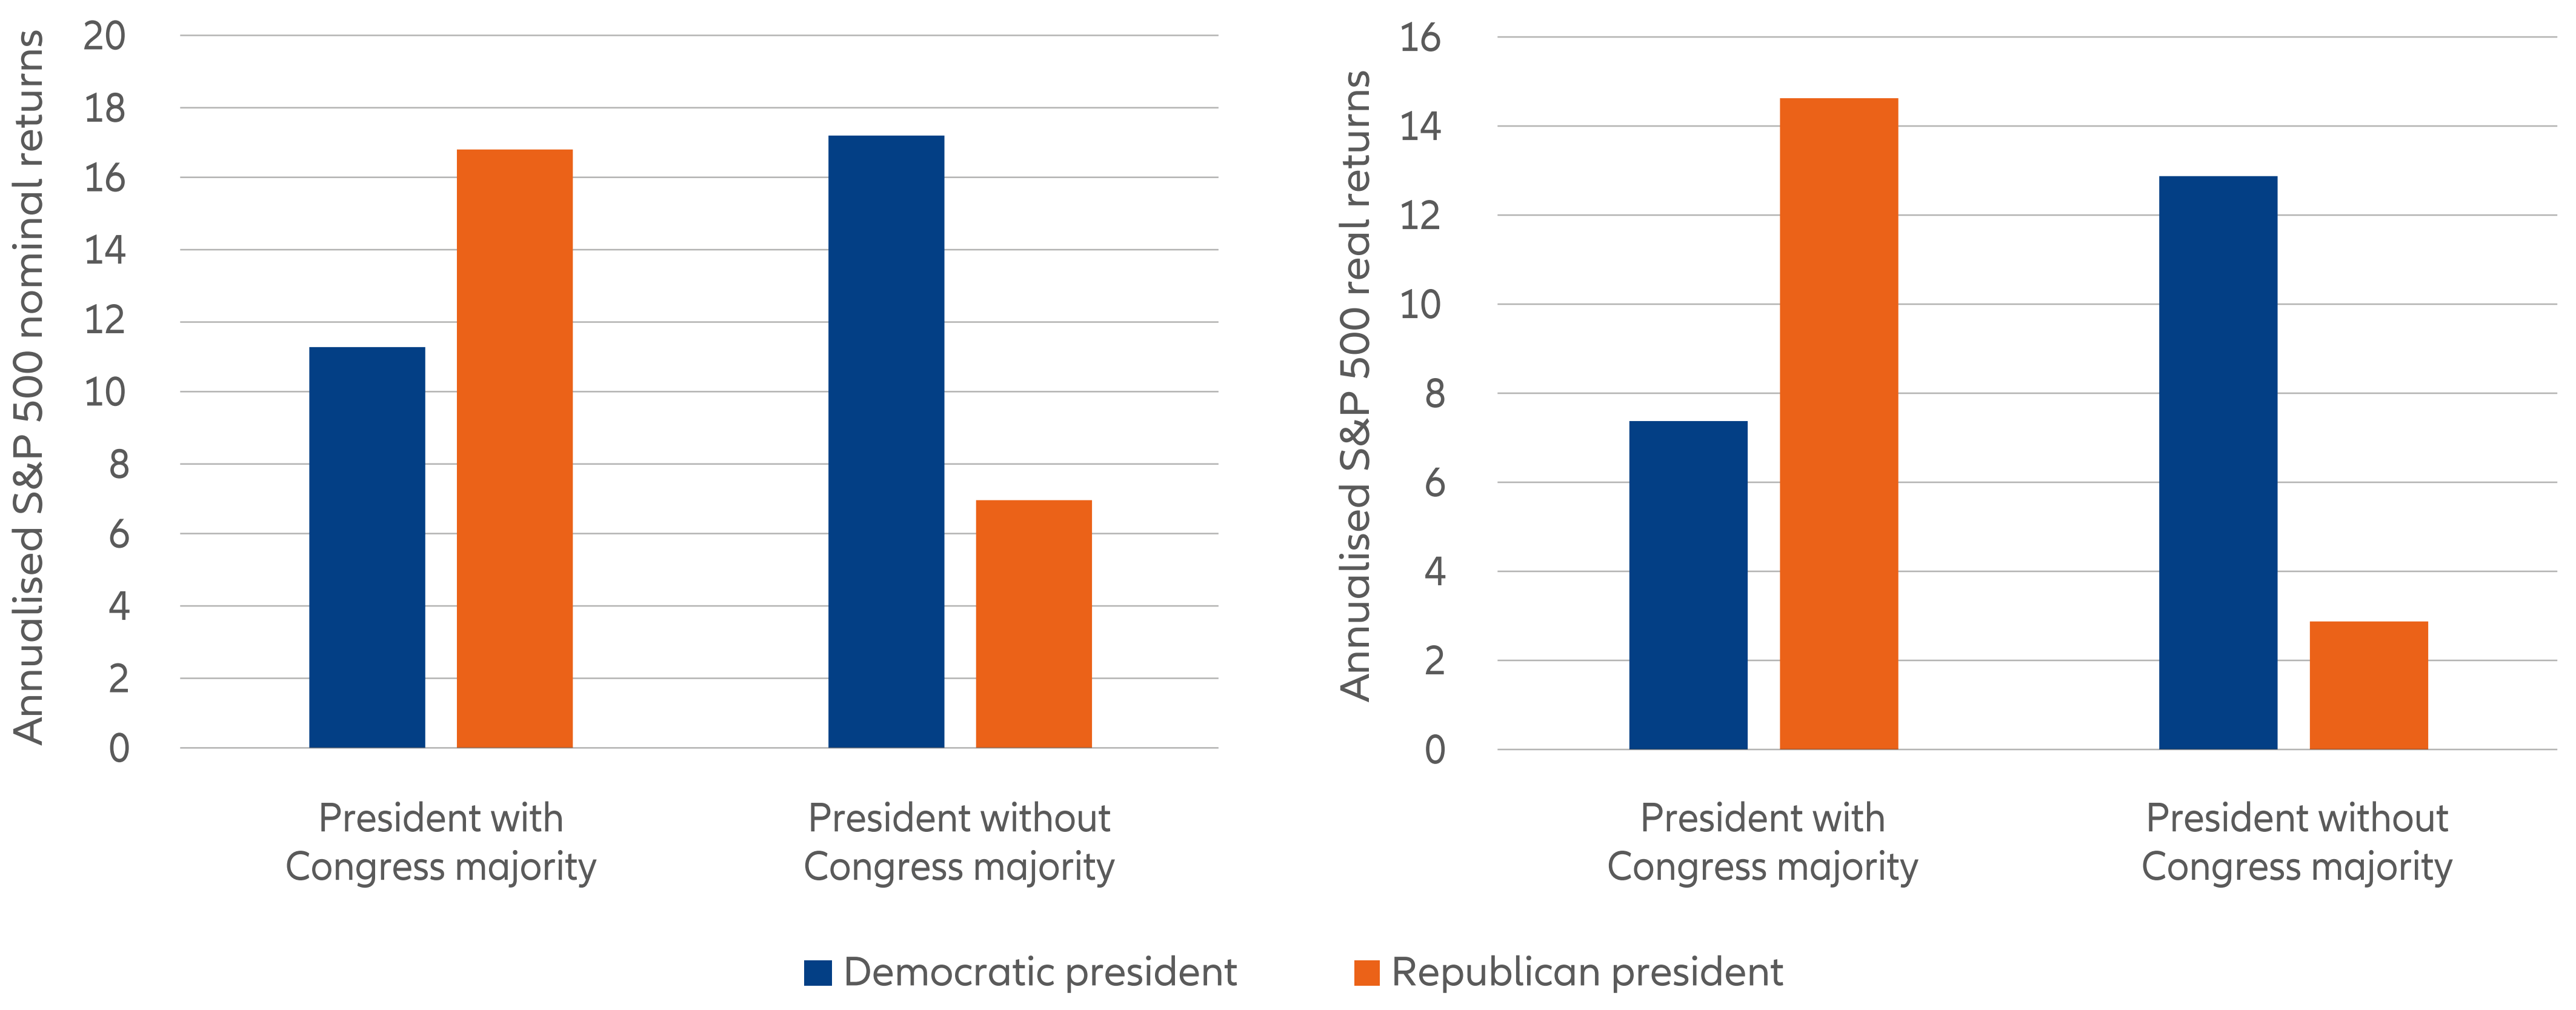 Exhibit 1: In nominal terms, US equities perform best under Democratic presidents without a majority in Congress. In real terms, the best returns are under Republican presidents with a Congress majority.